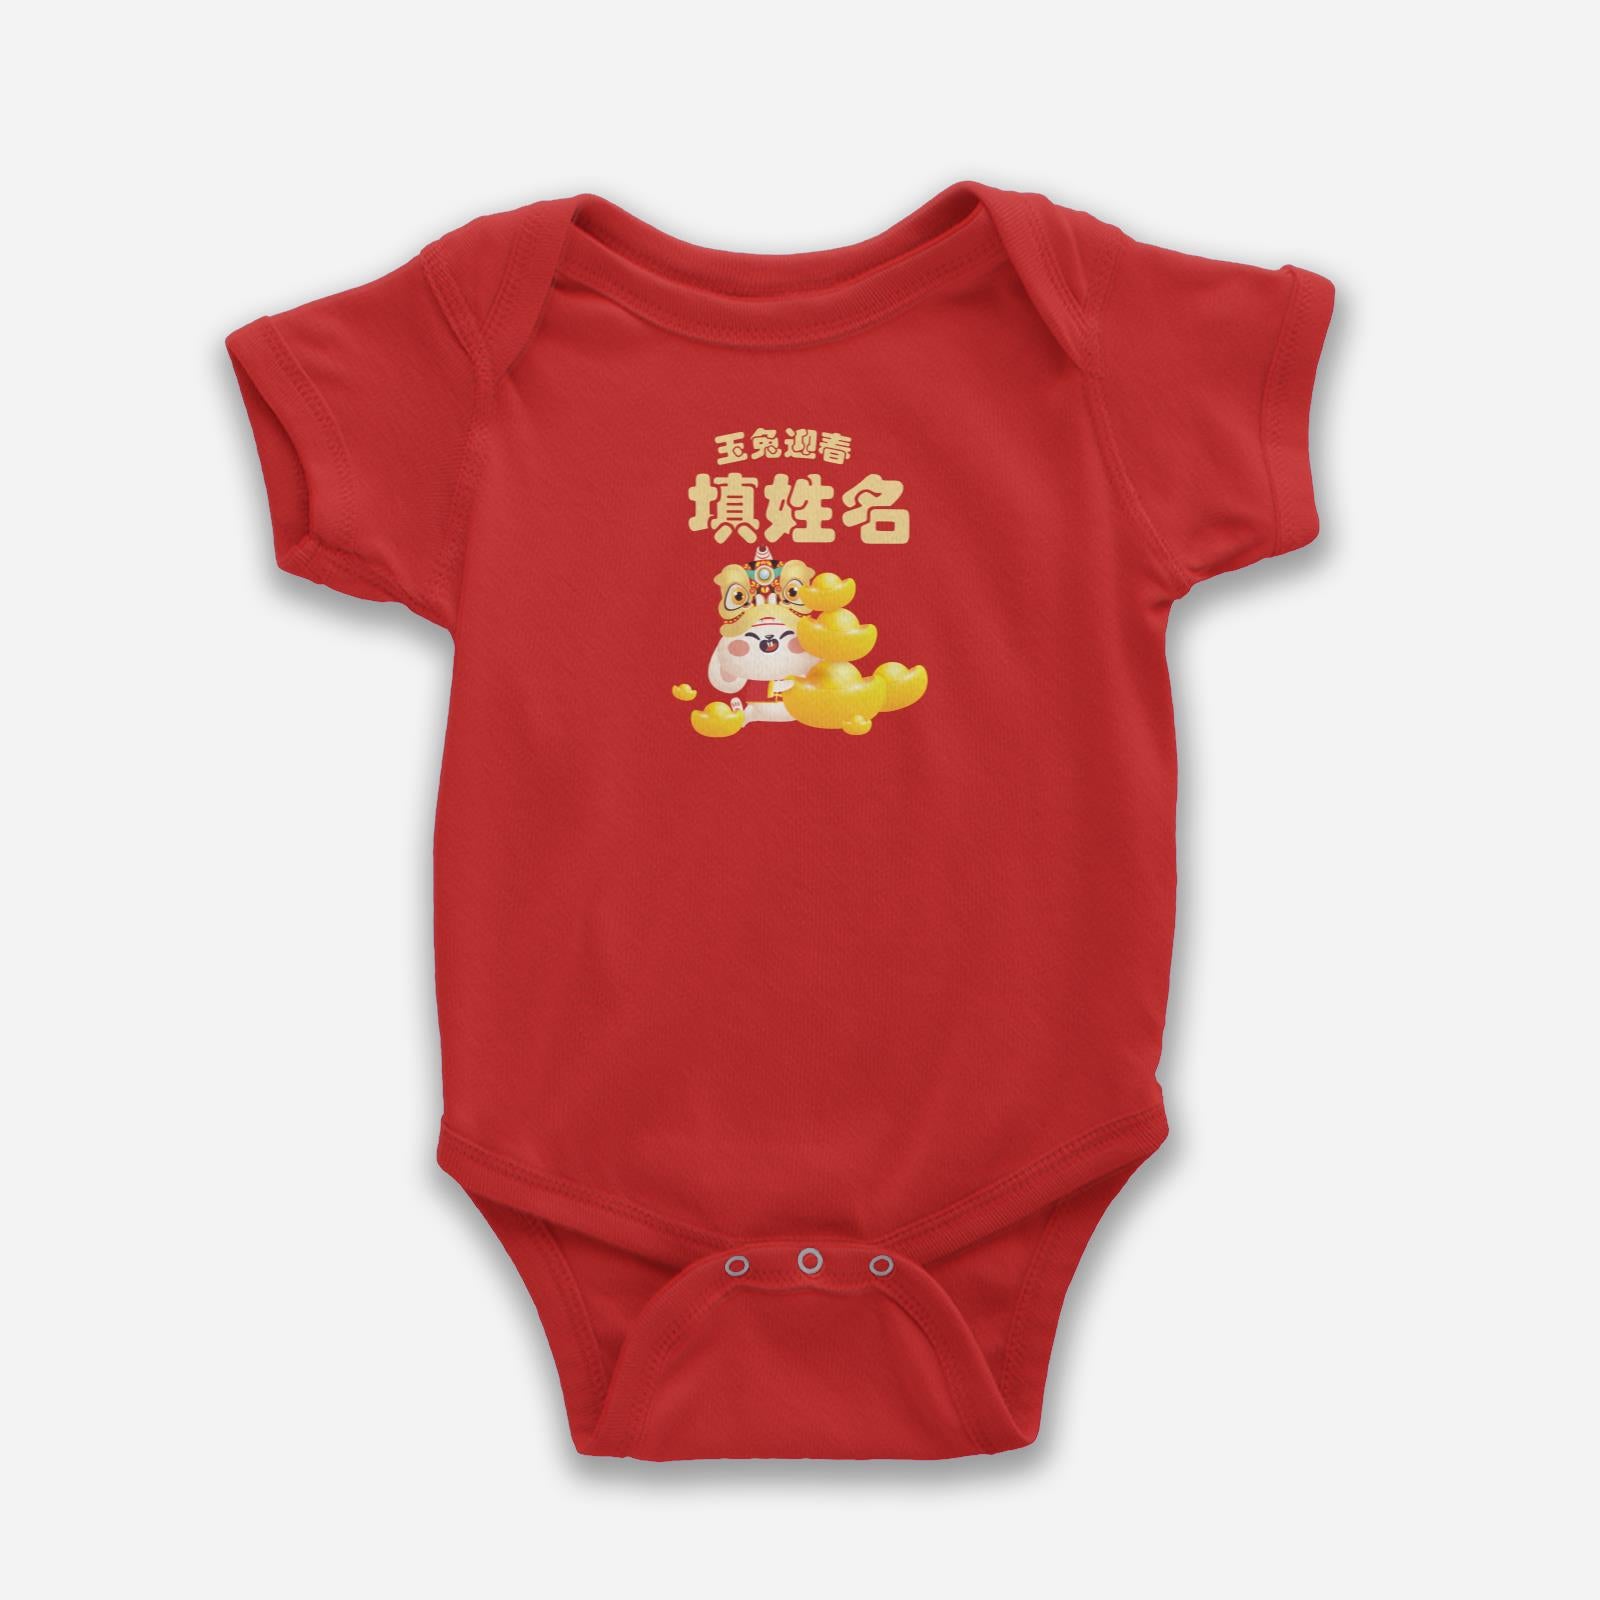 Cny Rabbit Family - Baby Rabbit Baby Romper with Chinese Personalization